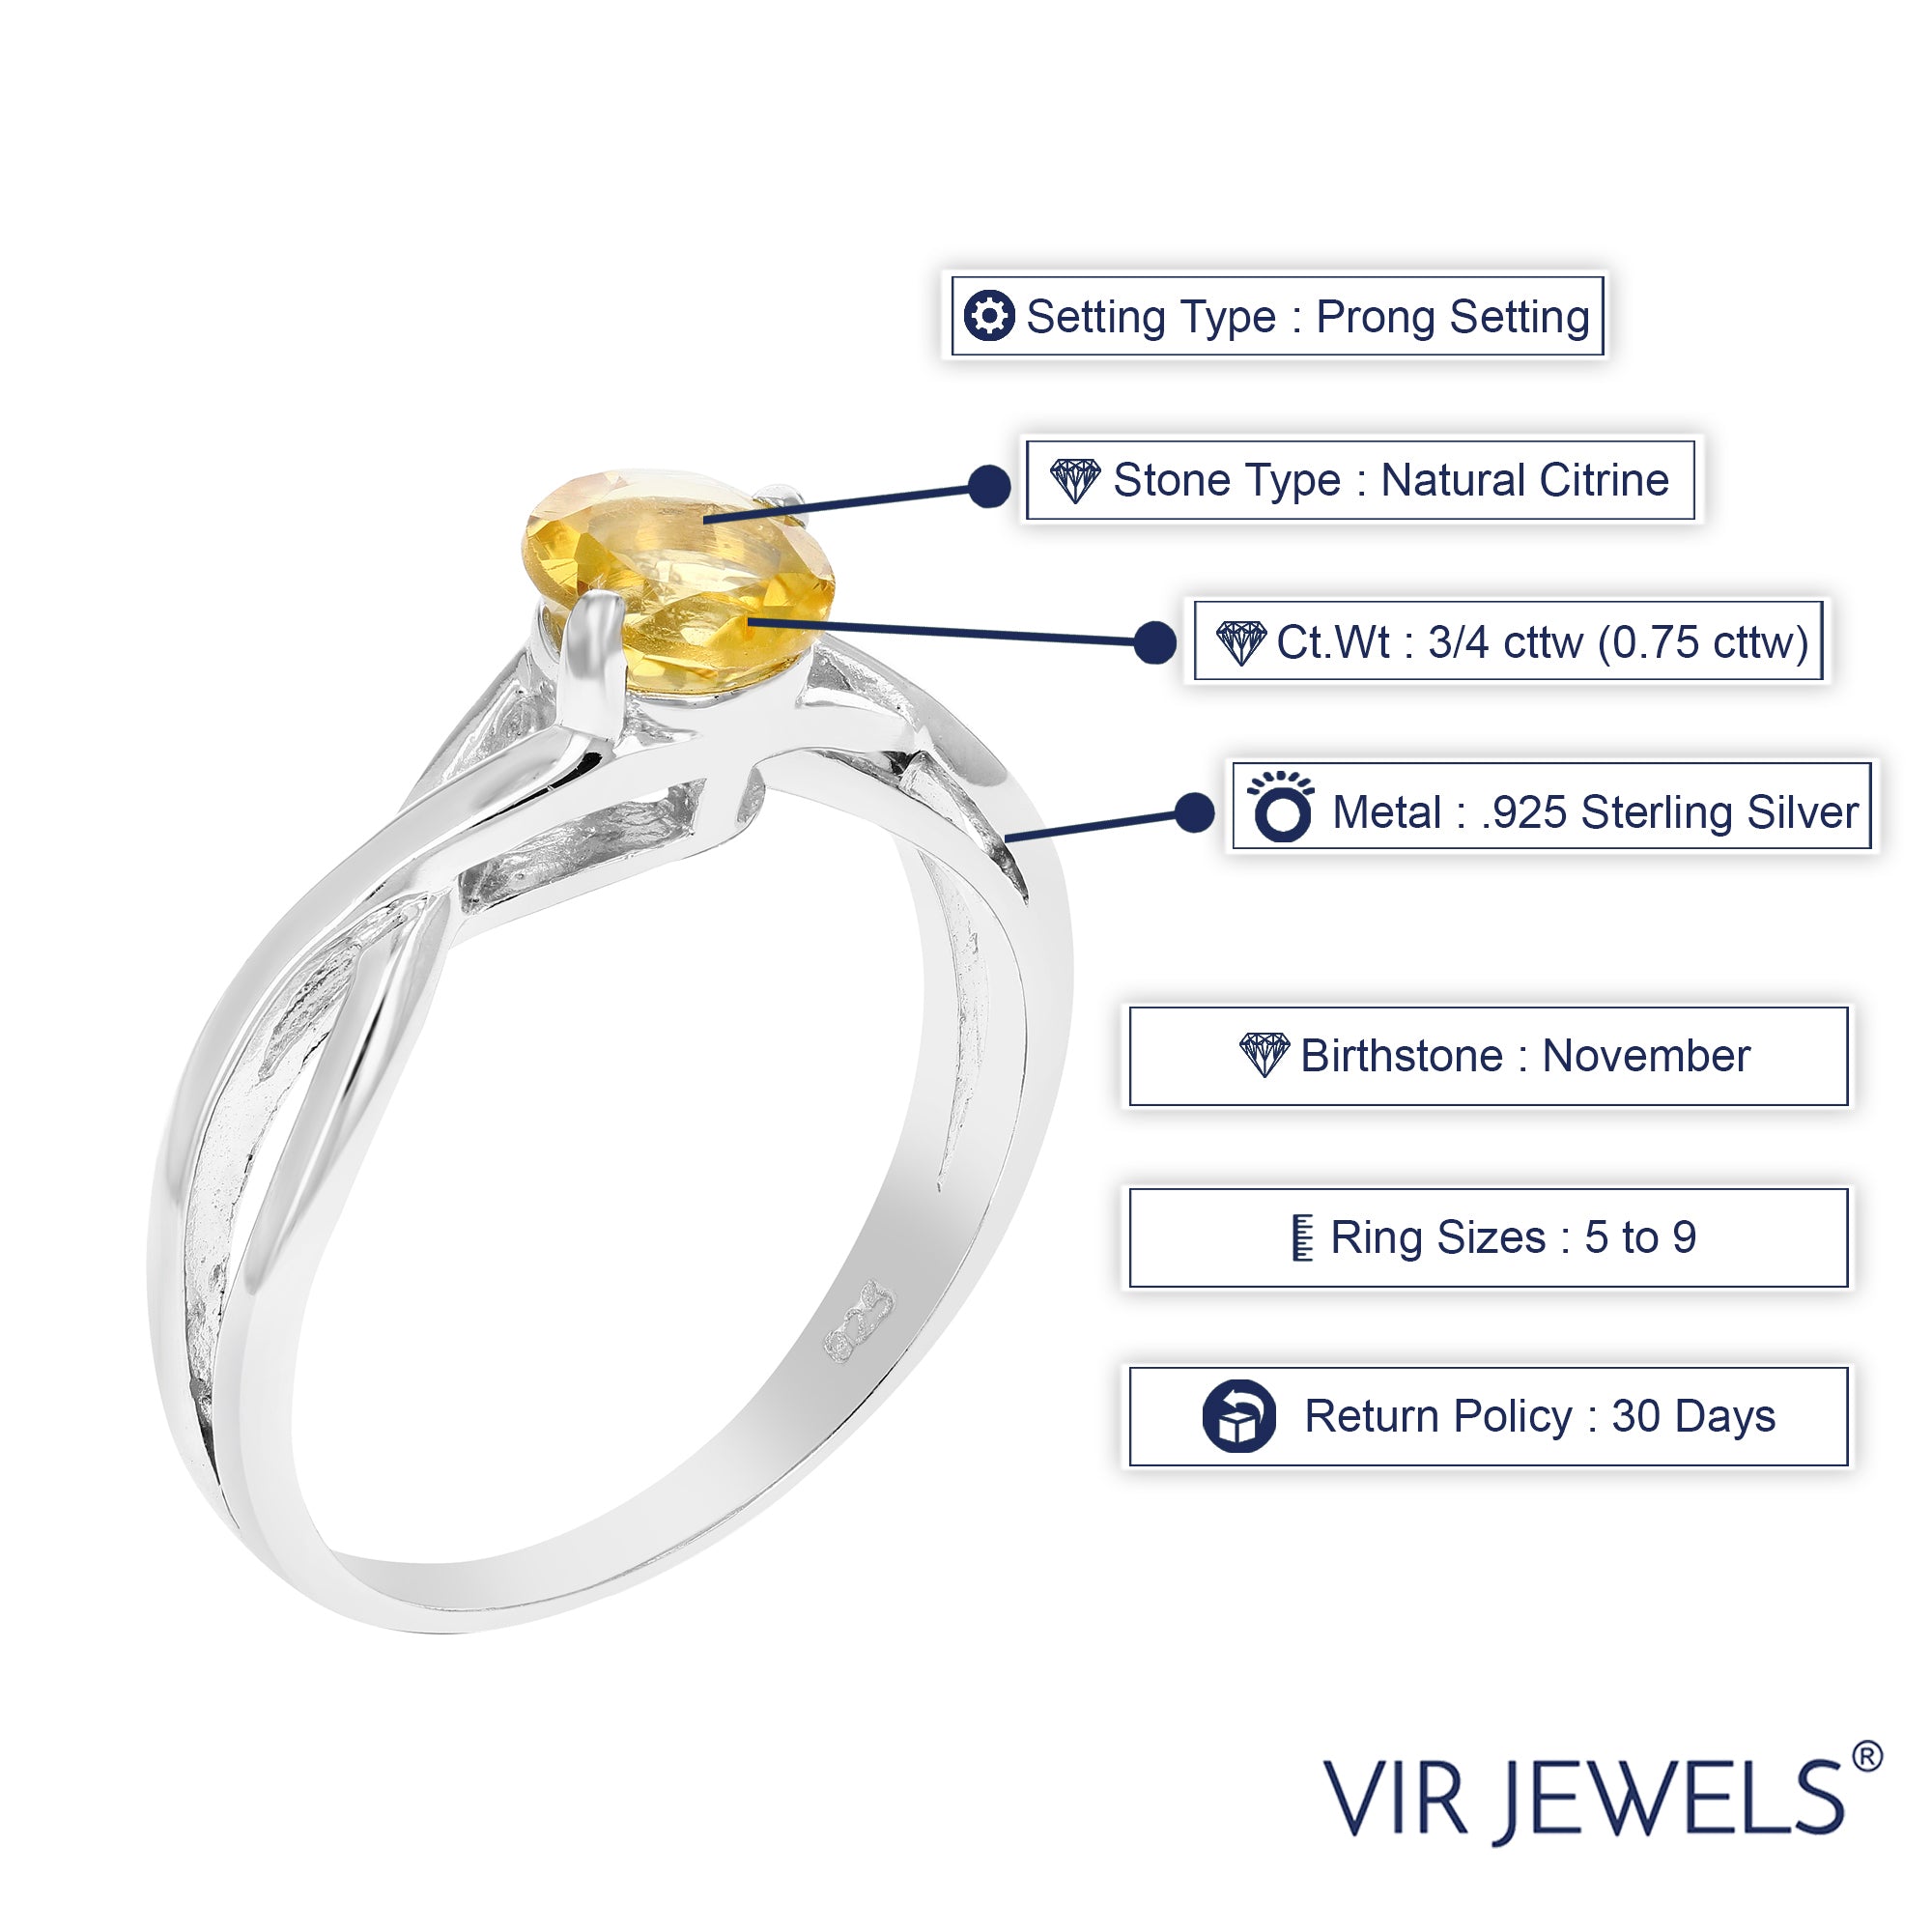 3/4 cttw Citrine Ring .925 Sterling Silver with Rhodium Plating Round Shape 6 MM